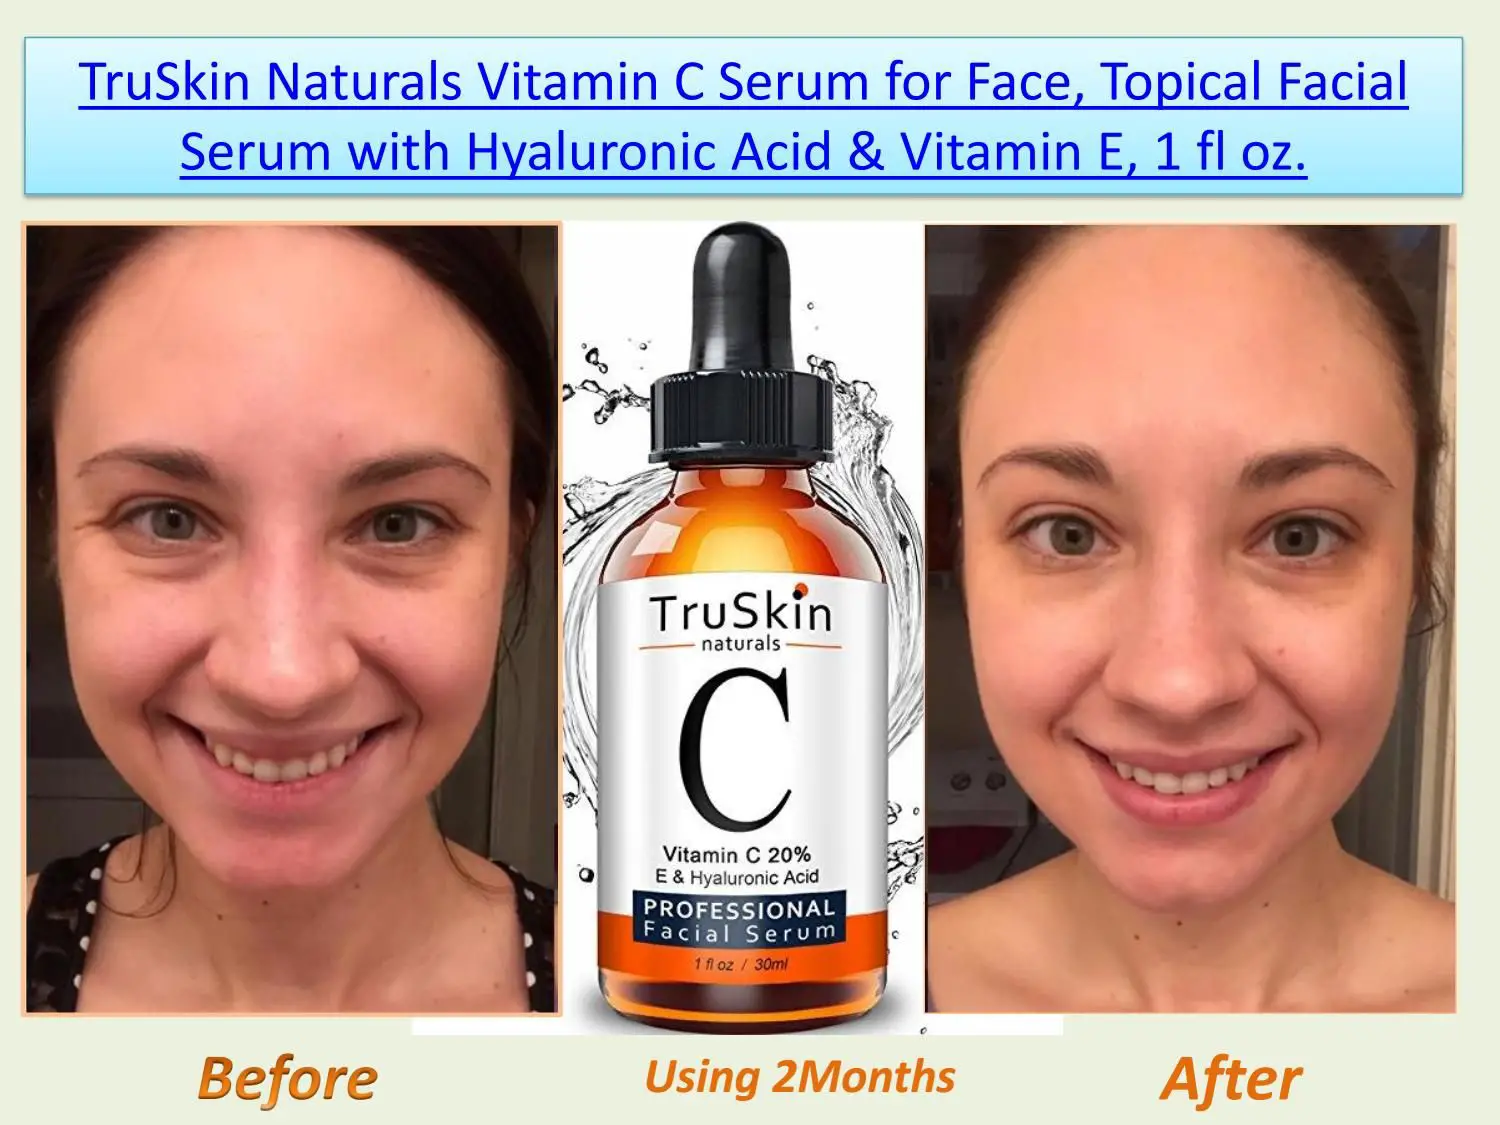 Hyaluronic Acid Serum Use With Vitamin C